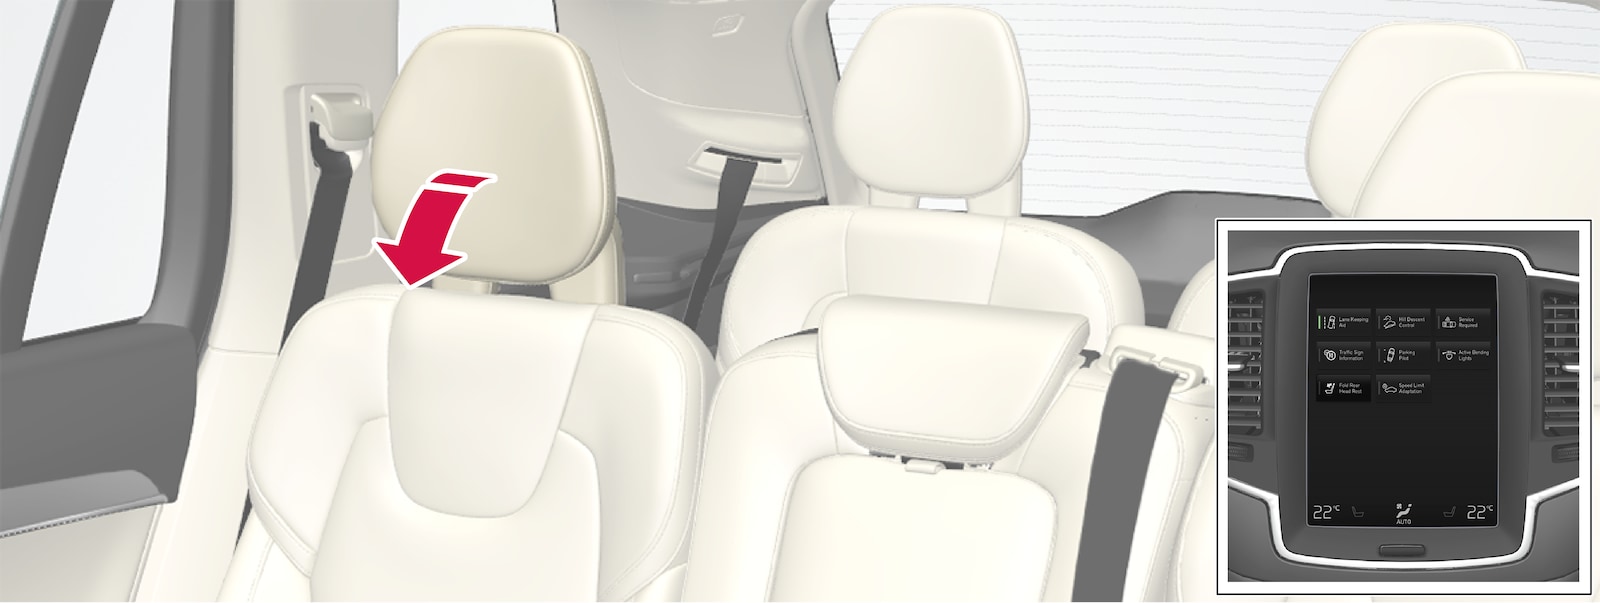 P5-1507-2nd seat row-Automatic folding down headrest back